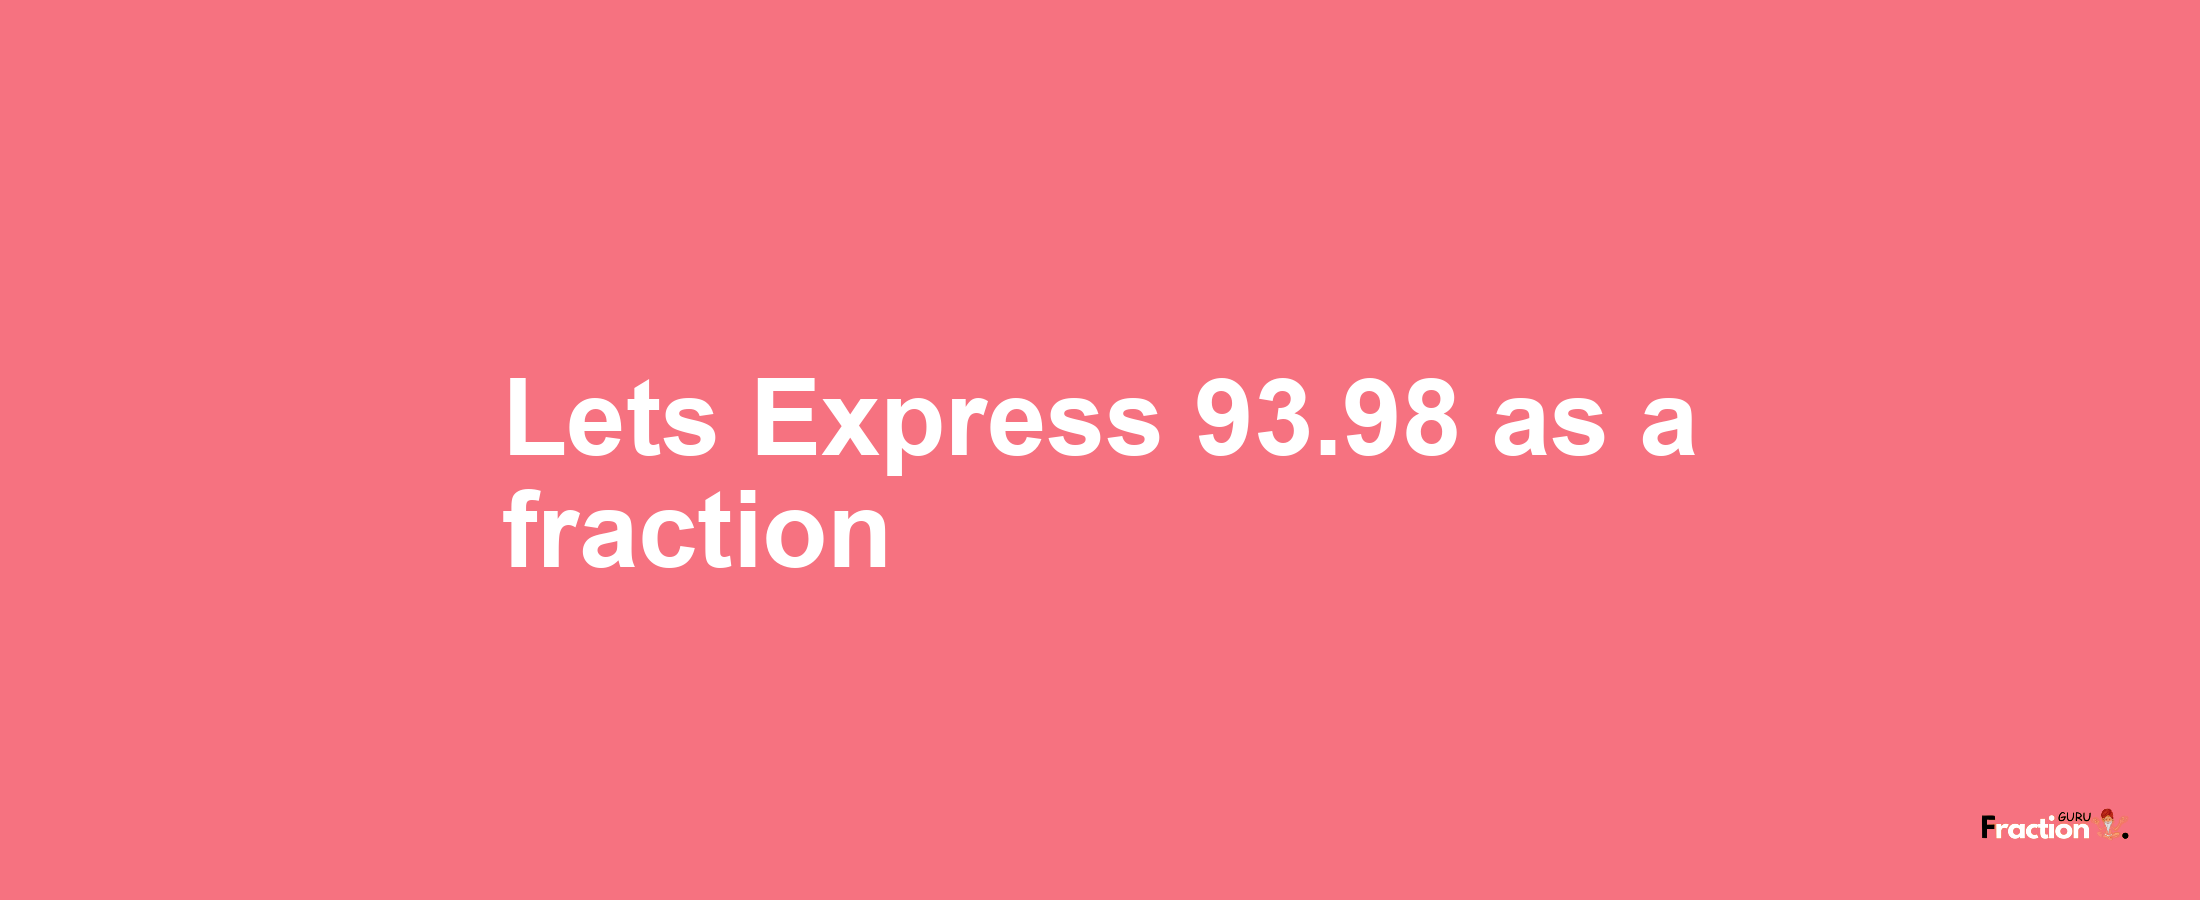 Lets Express 93.98 as afraction